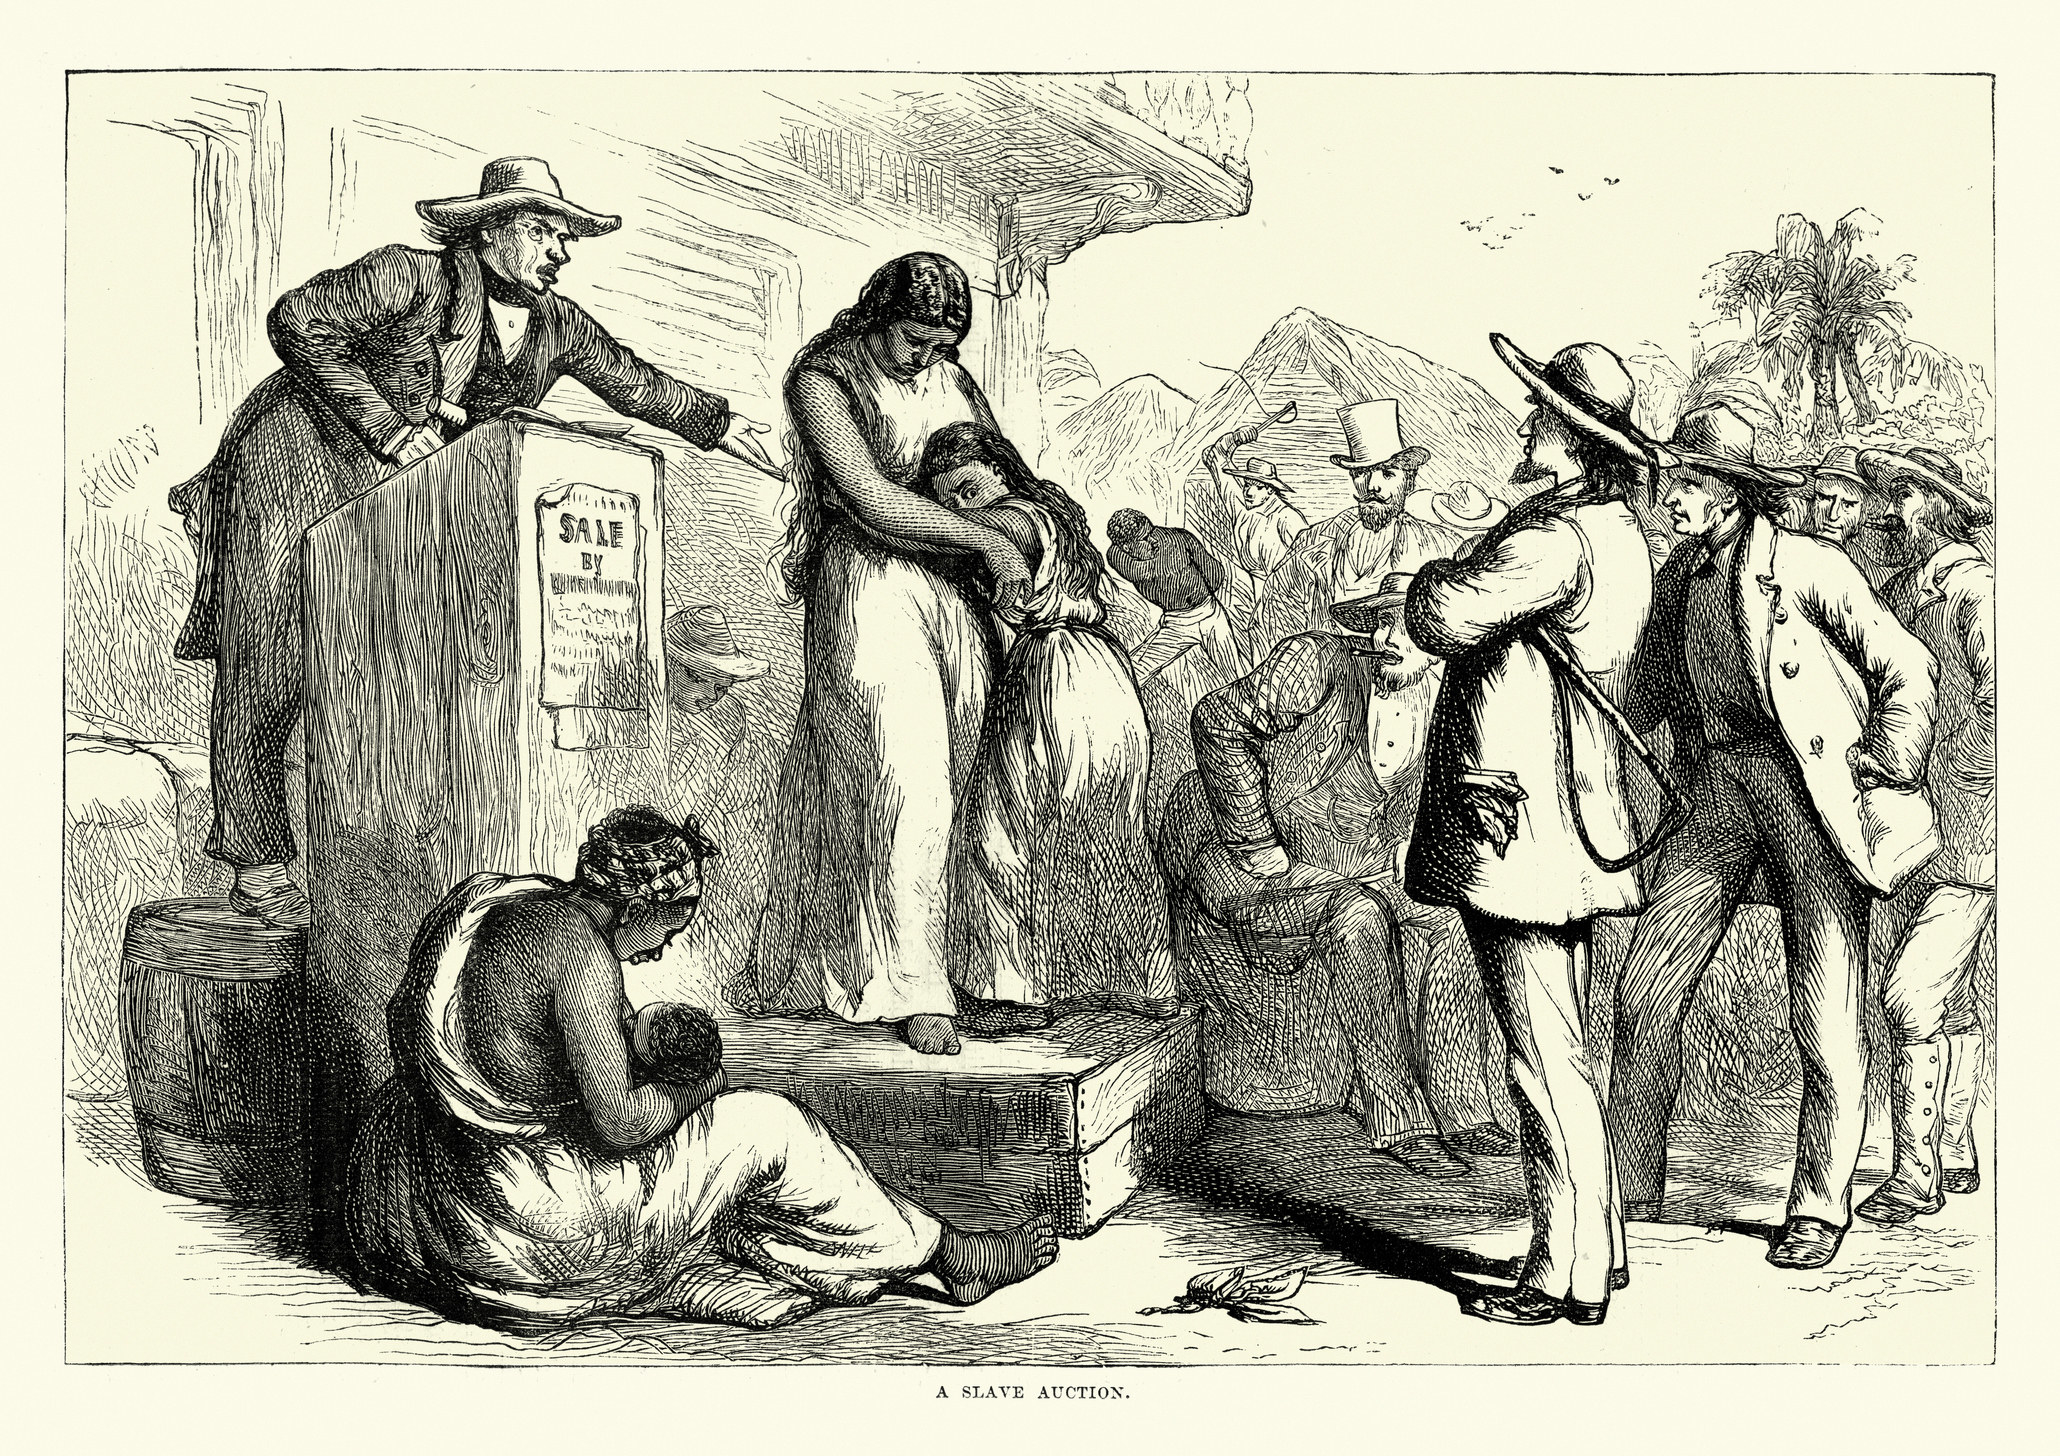 Rendering of a slave auction